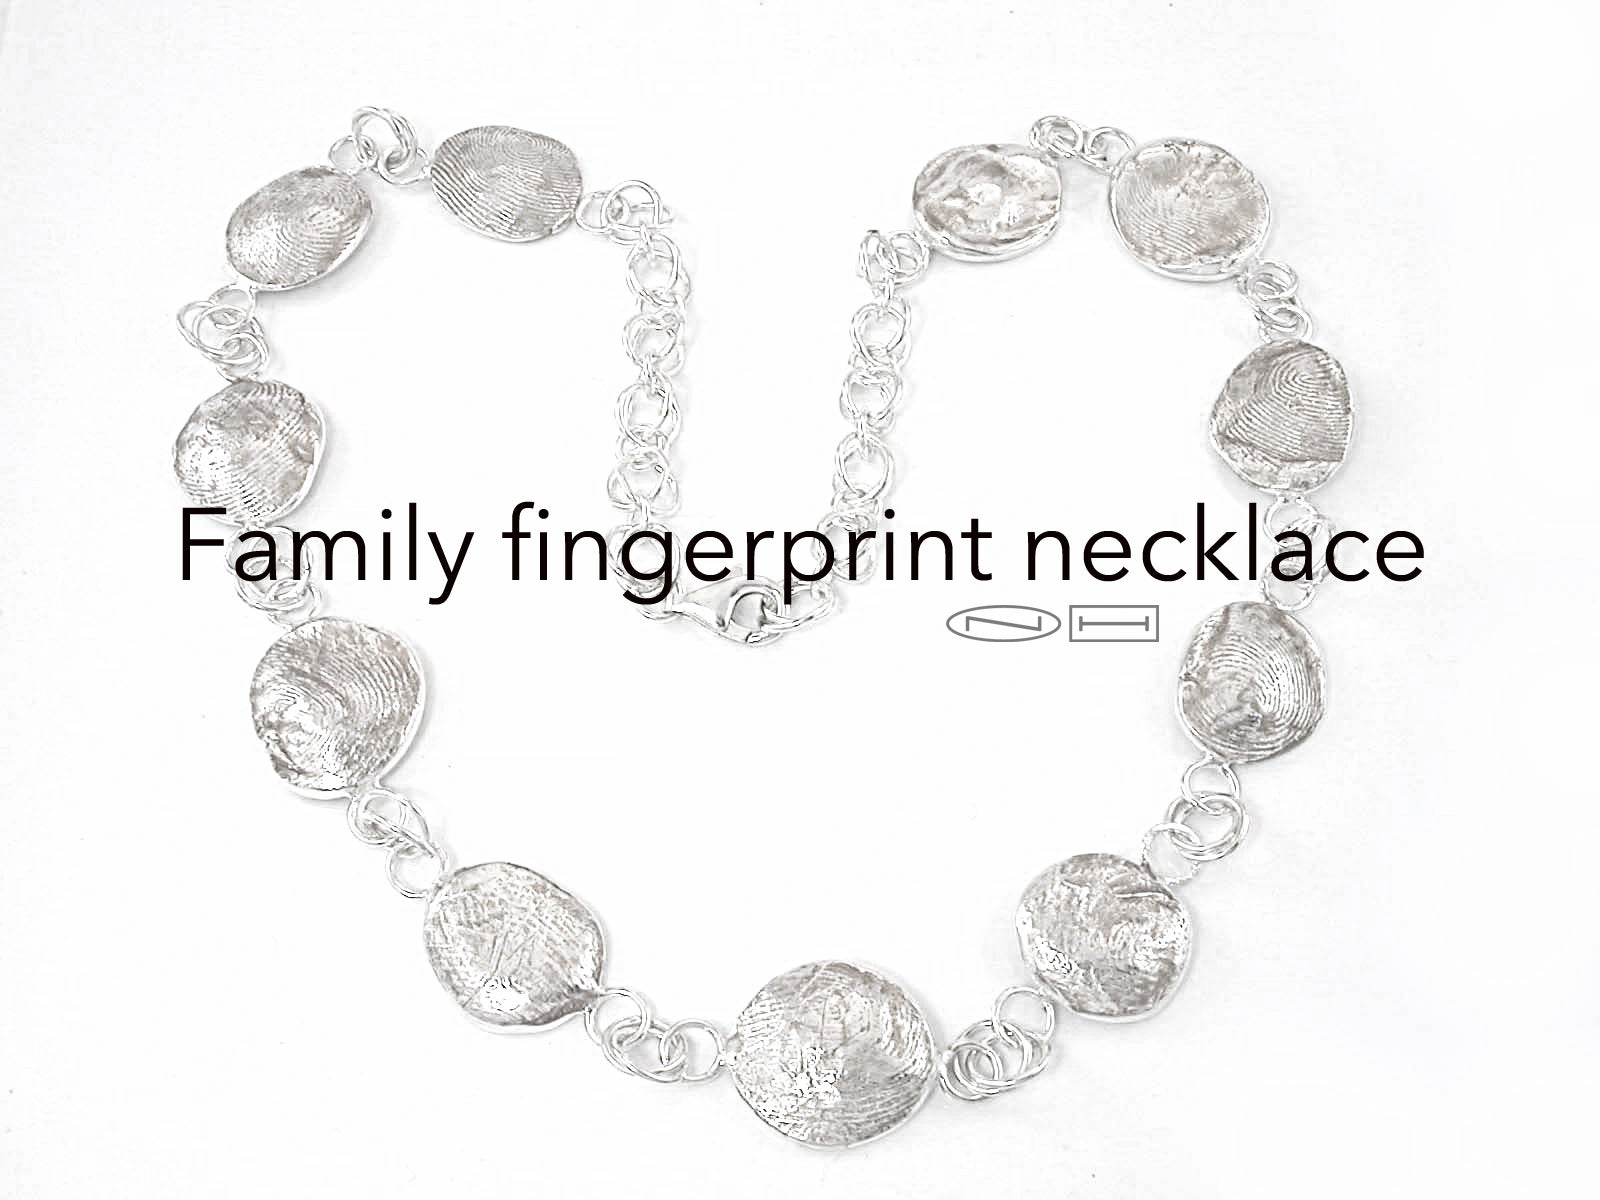 Personalized, fingerprint, thumbprint, dog print, jewellery made from 100% recycled silver, gold, platinum, and palladium, by ZEALmetal, Nicole Horlor, in Kingston, ON, Canada